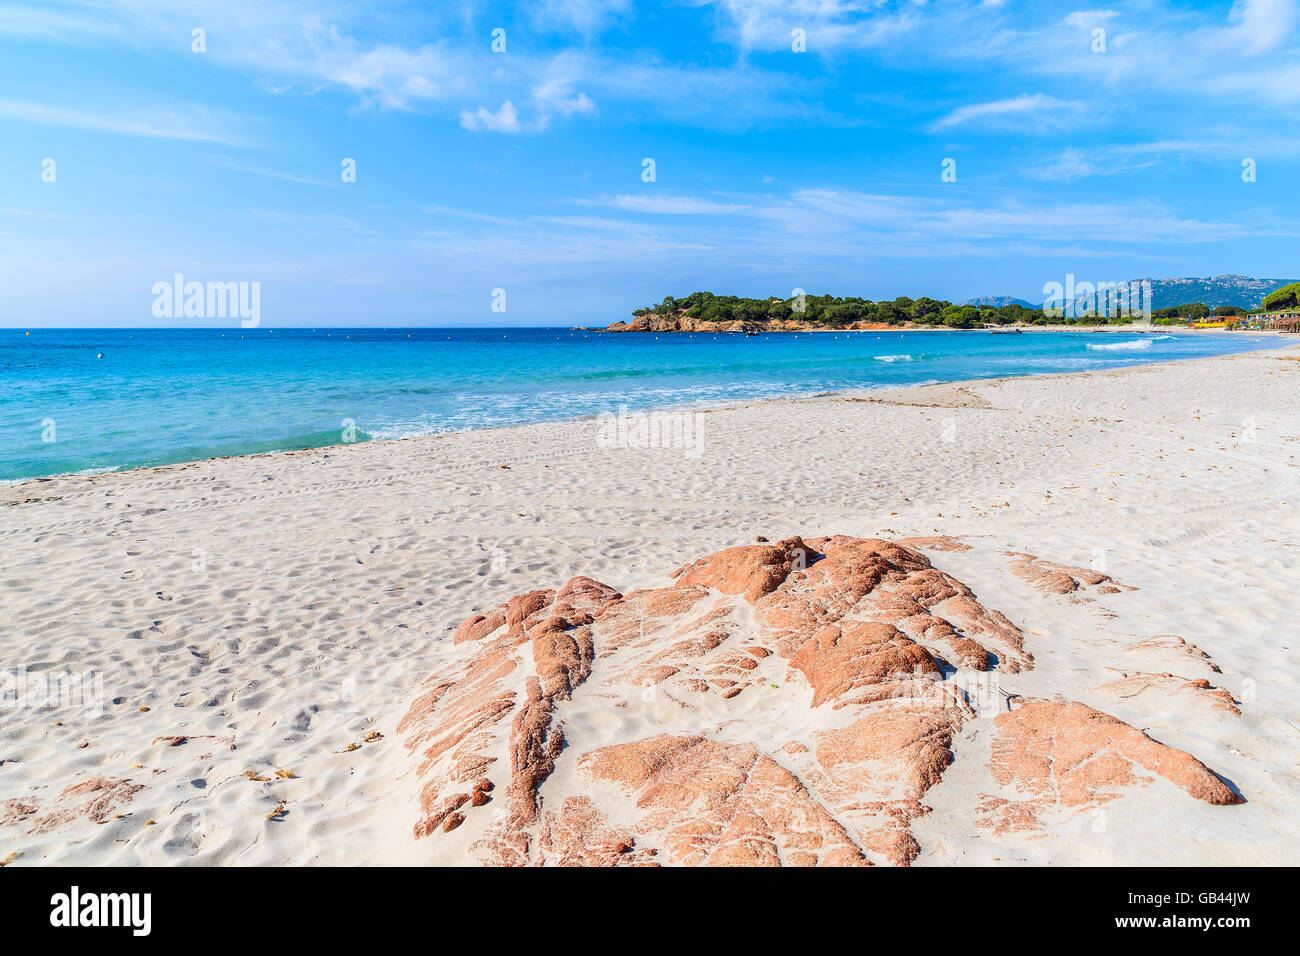 A view of white sand Palombagia beach, Corsica island, France Stock Photo